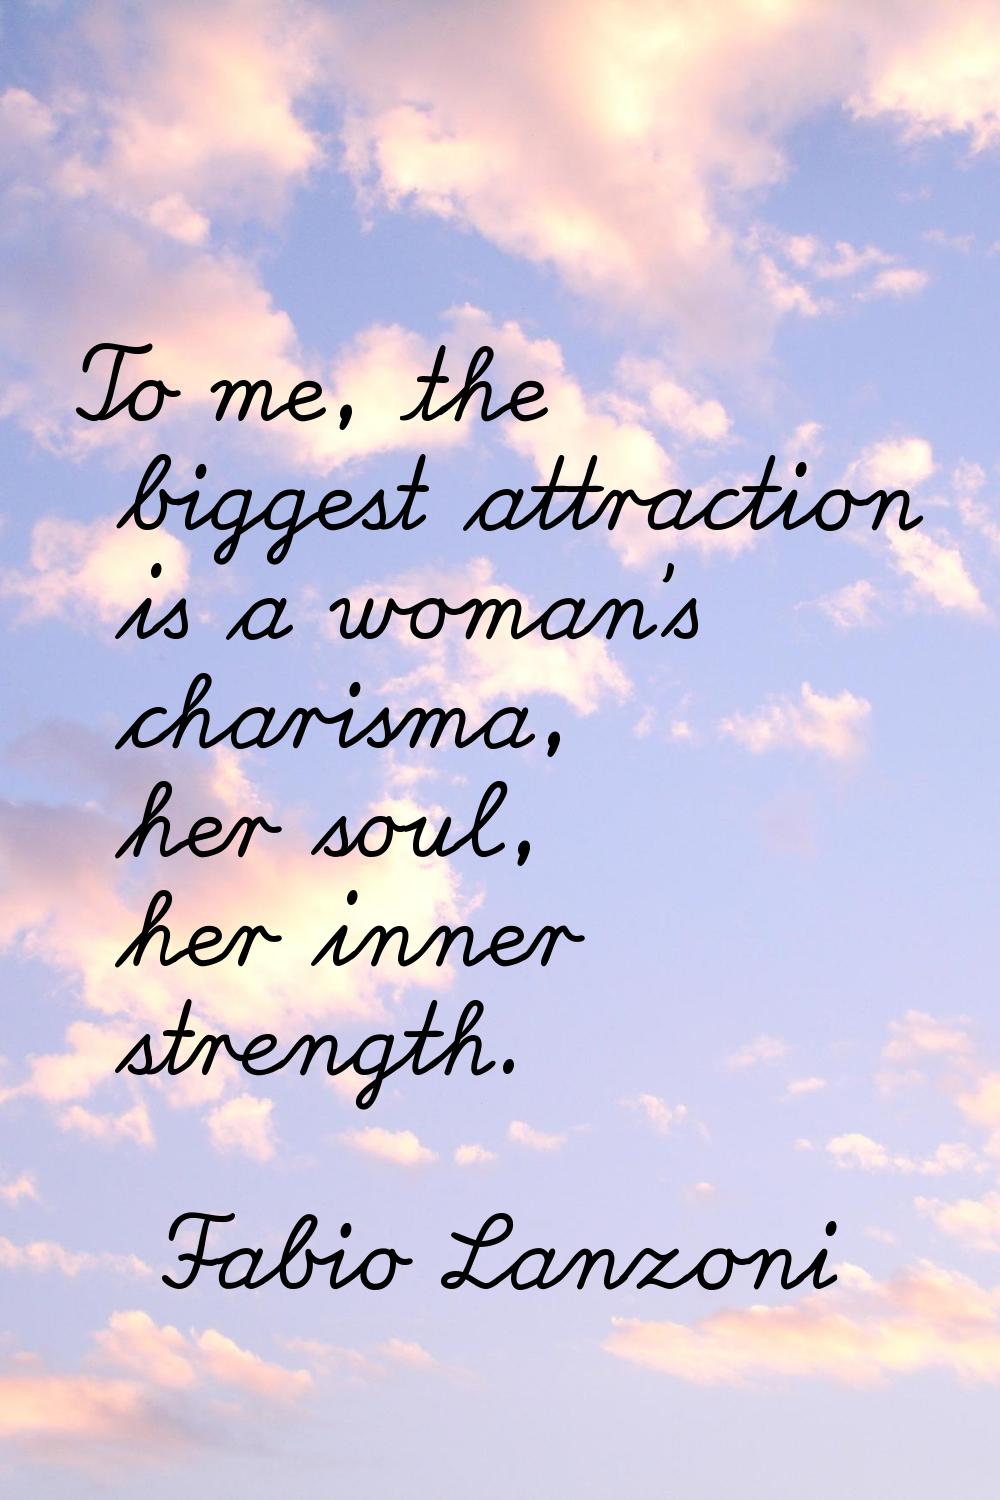 To me, the biggest attraction is a woman's charisma, her soul, her inner strength.